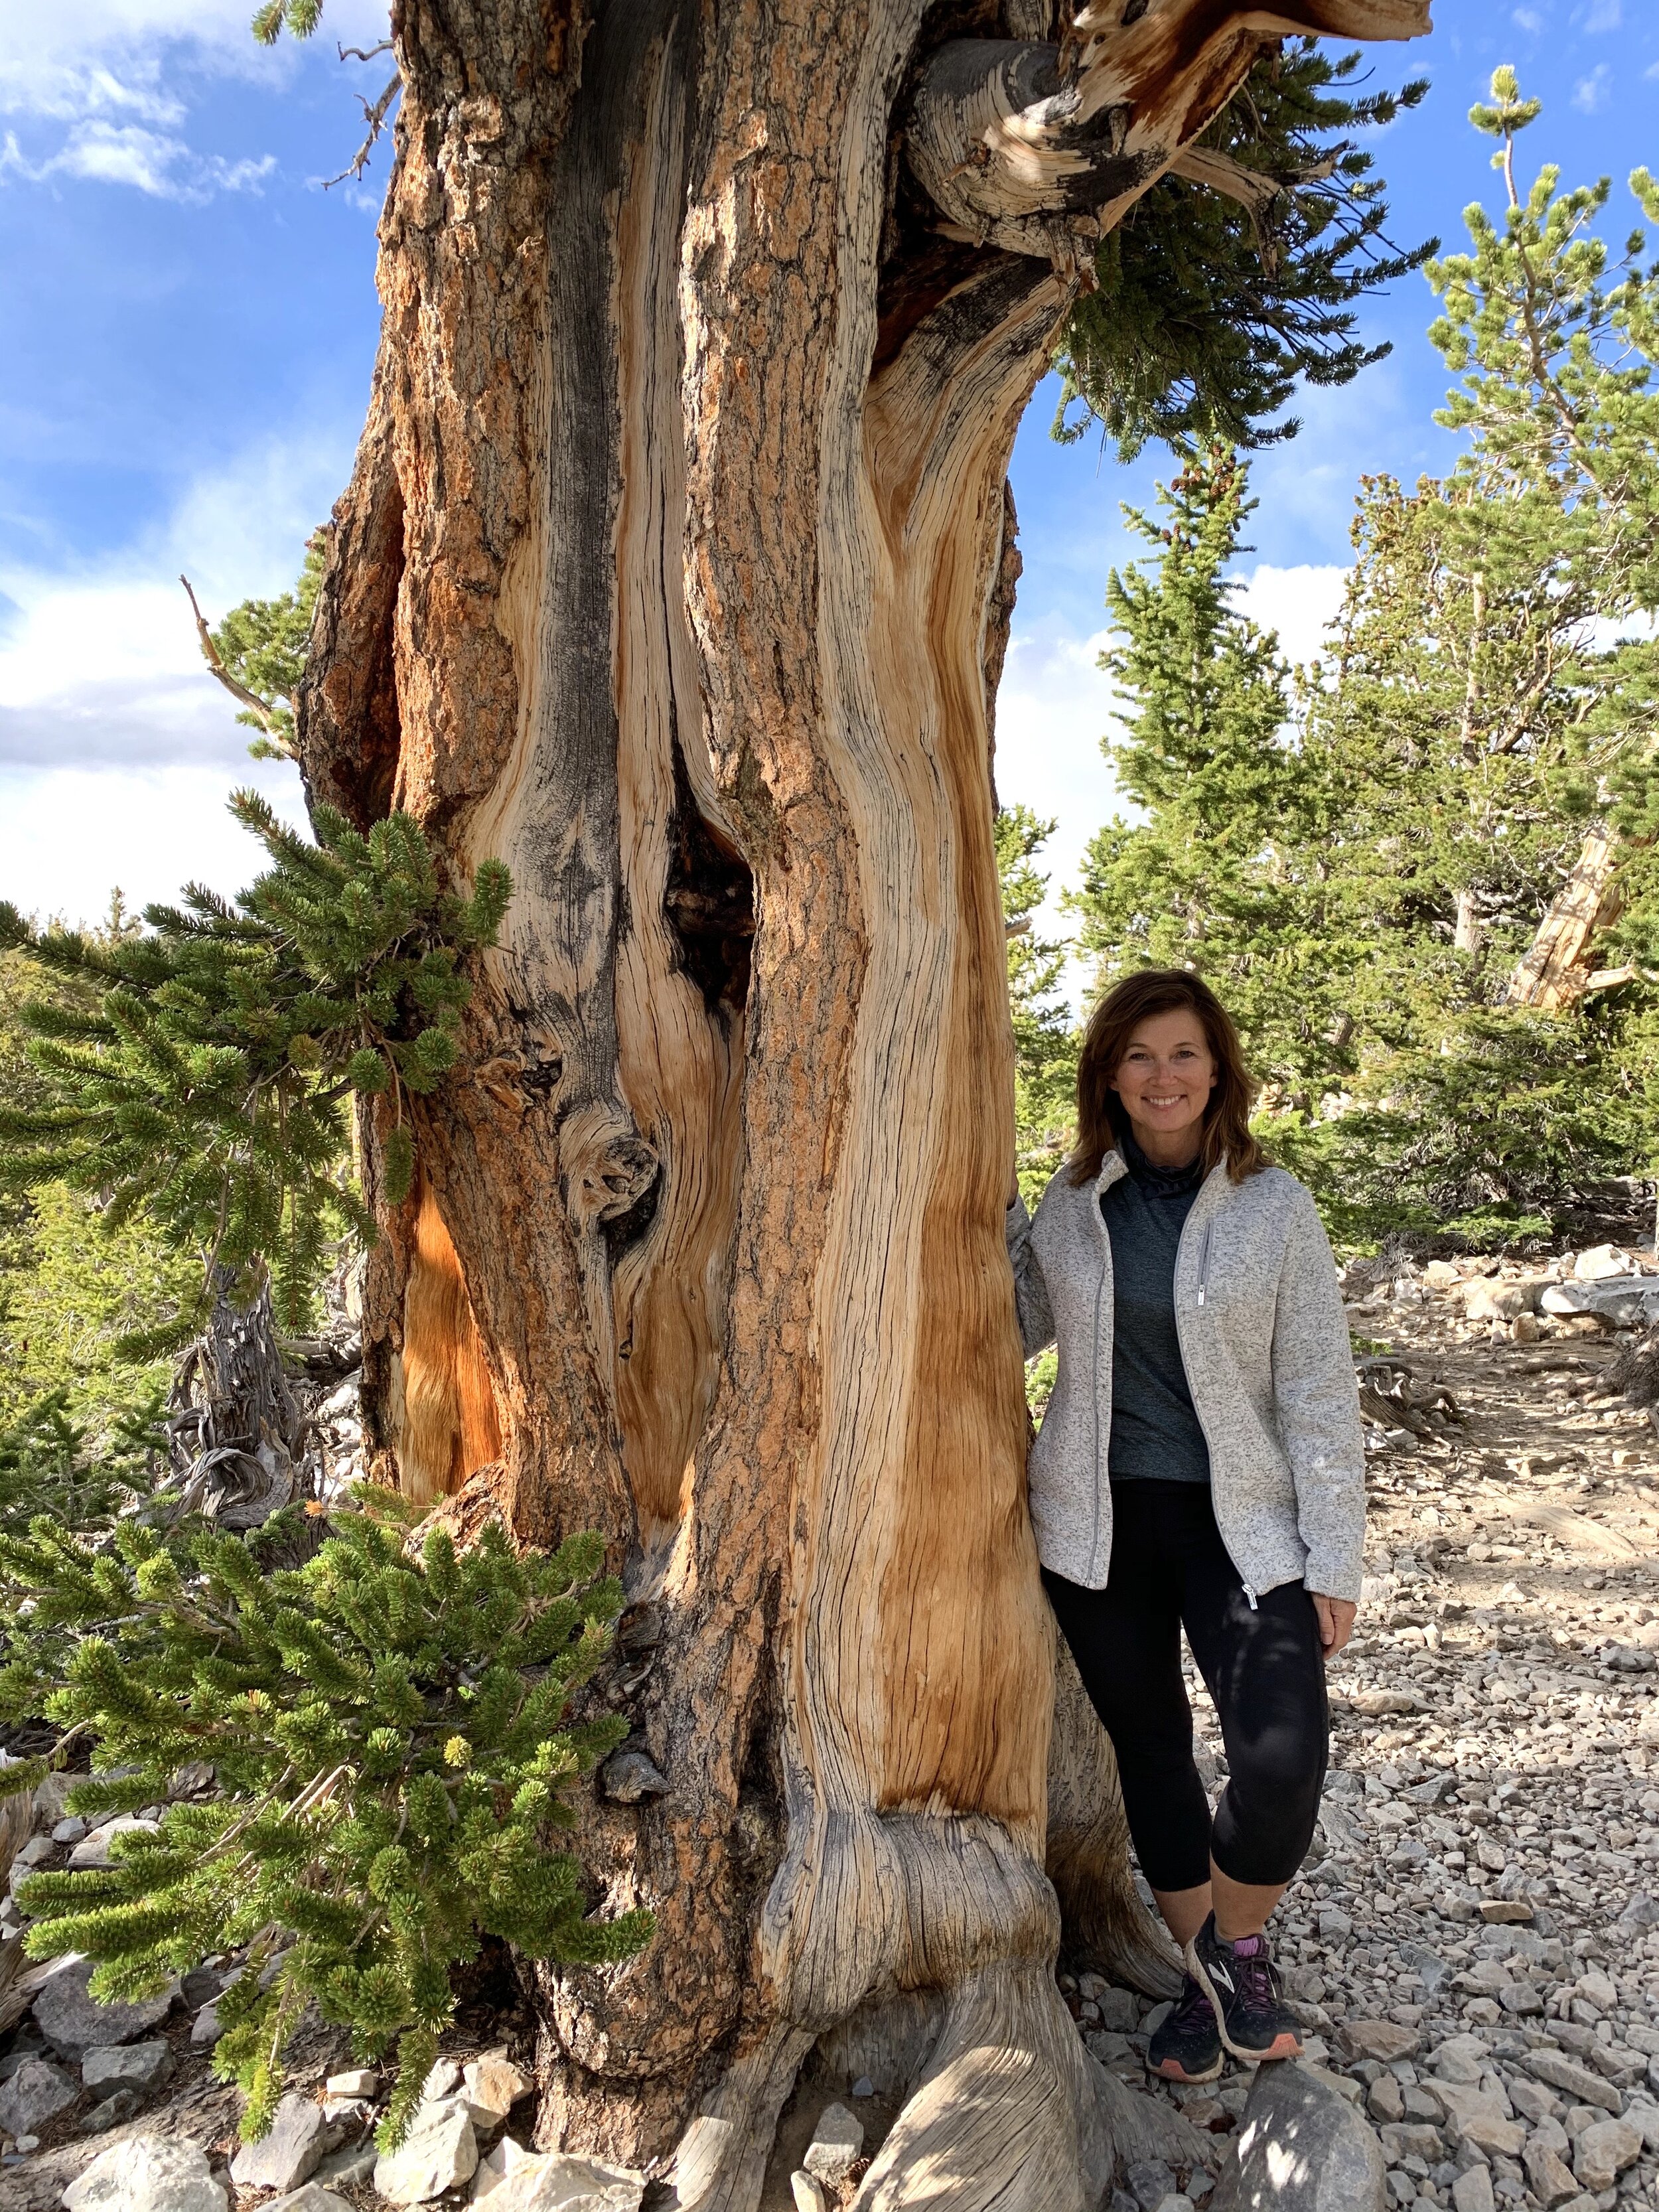  Bristlecone pine trees have bottle-brush shaped bristles that grow in batches. They’re special because some bristlecone pines are nearly 5,000 years old—the oldest living things in the world. 